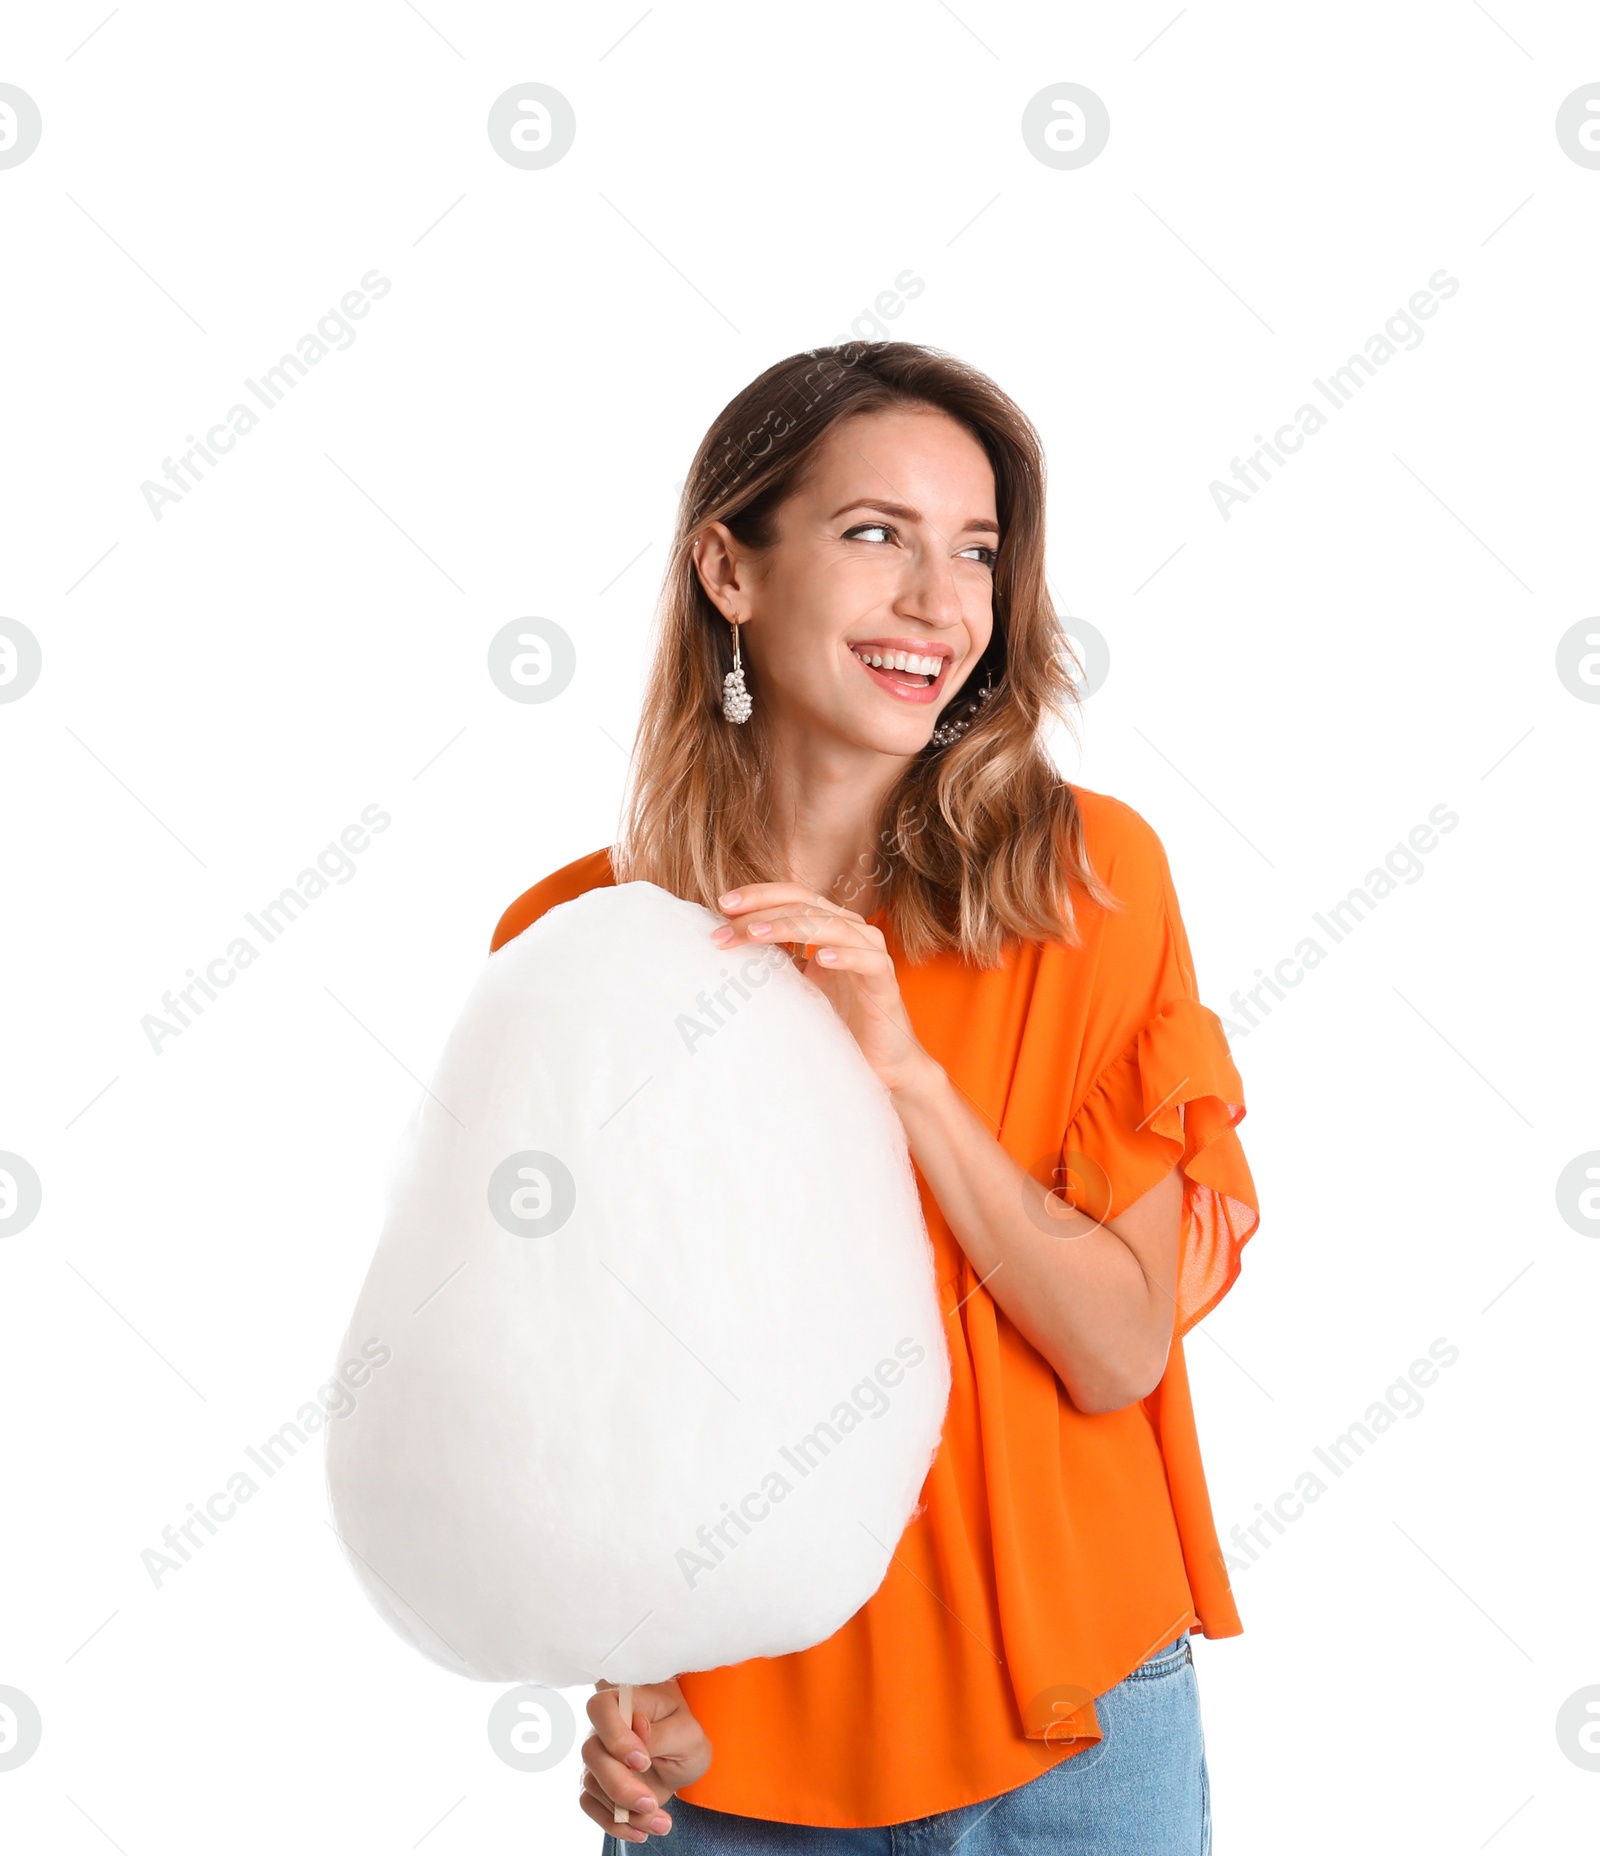 Photo of Happy young woman with cotton candy on white background